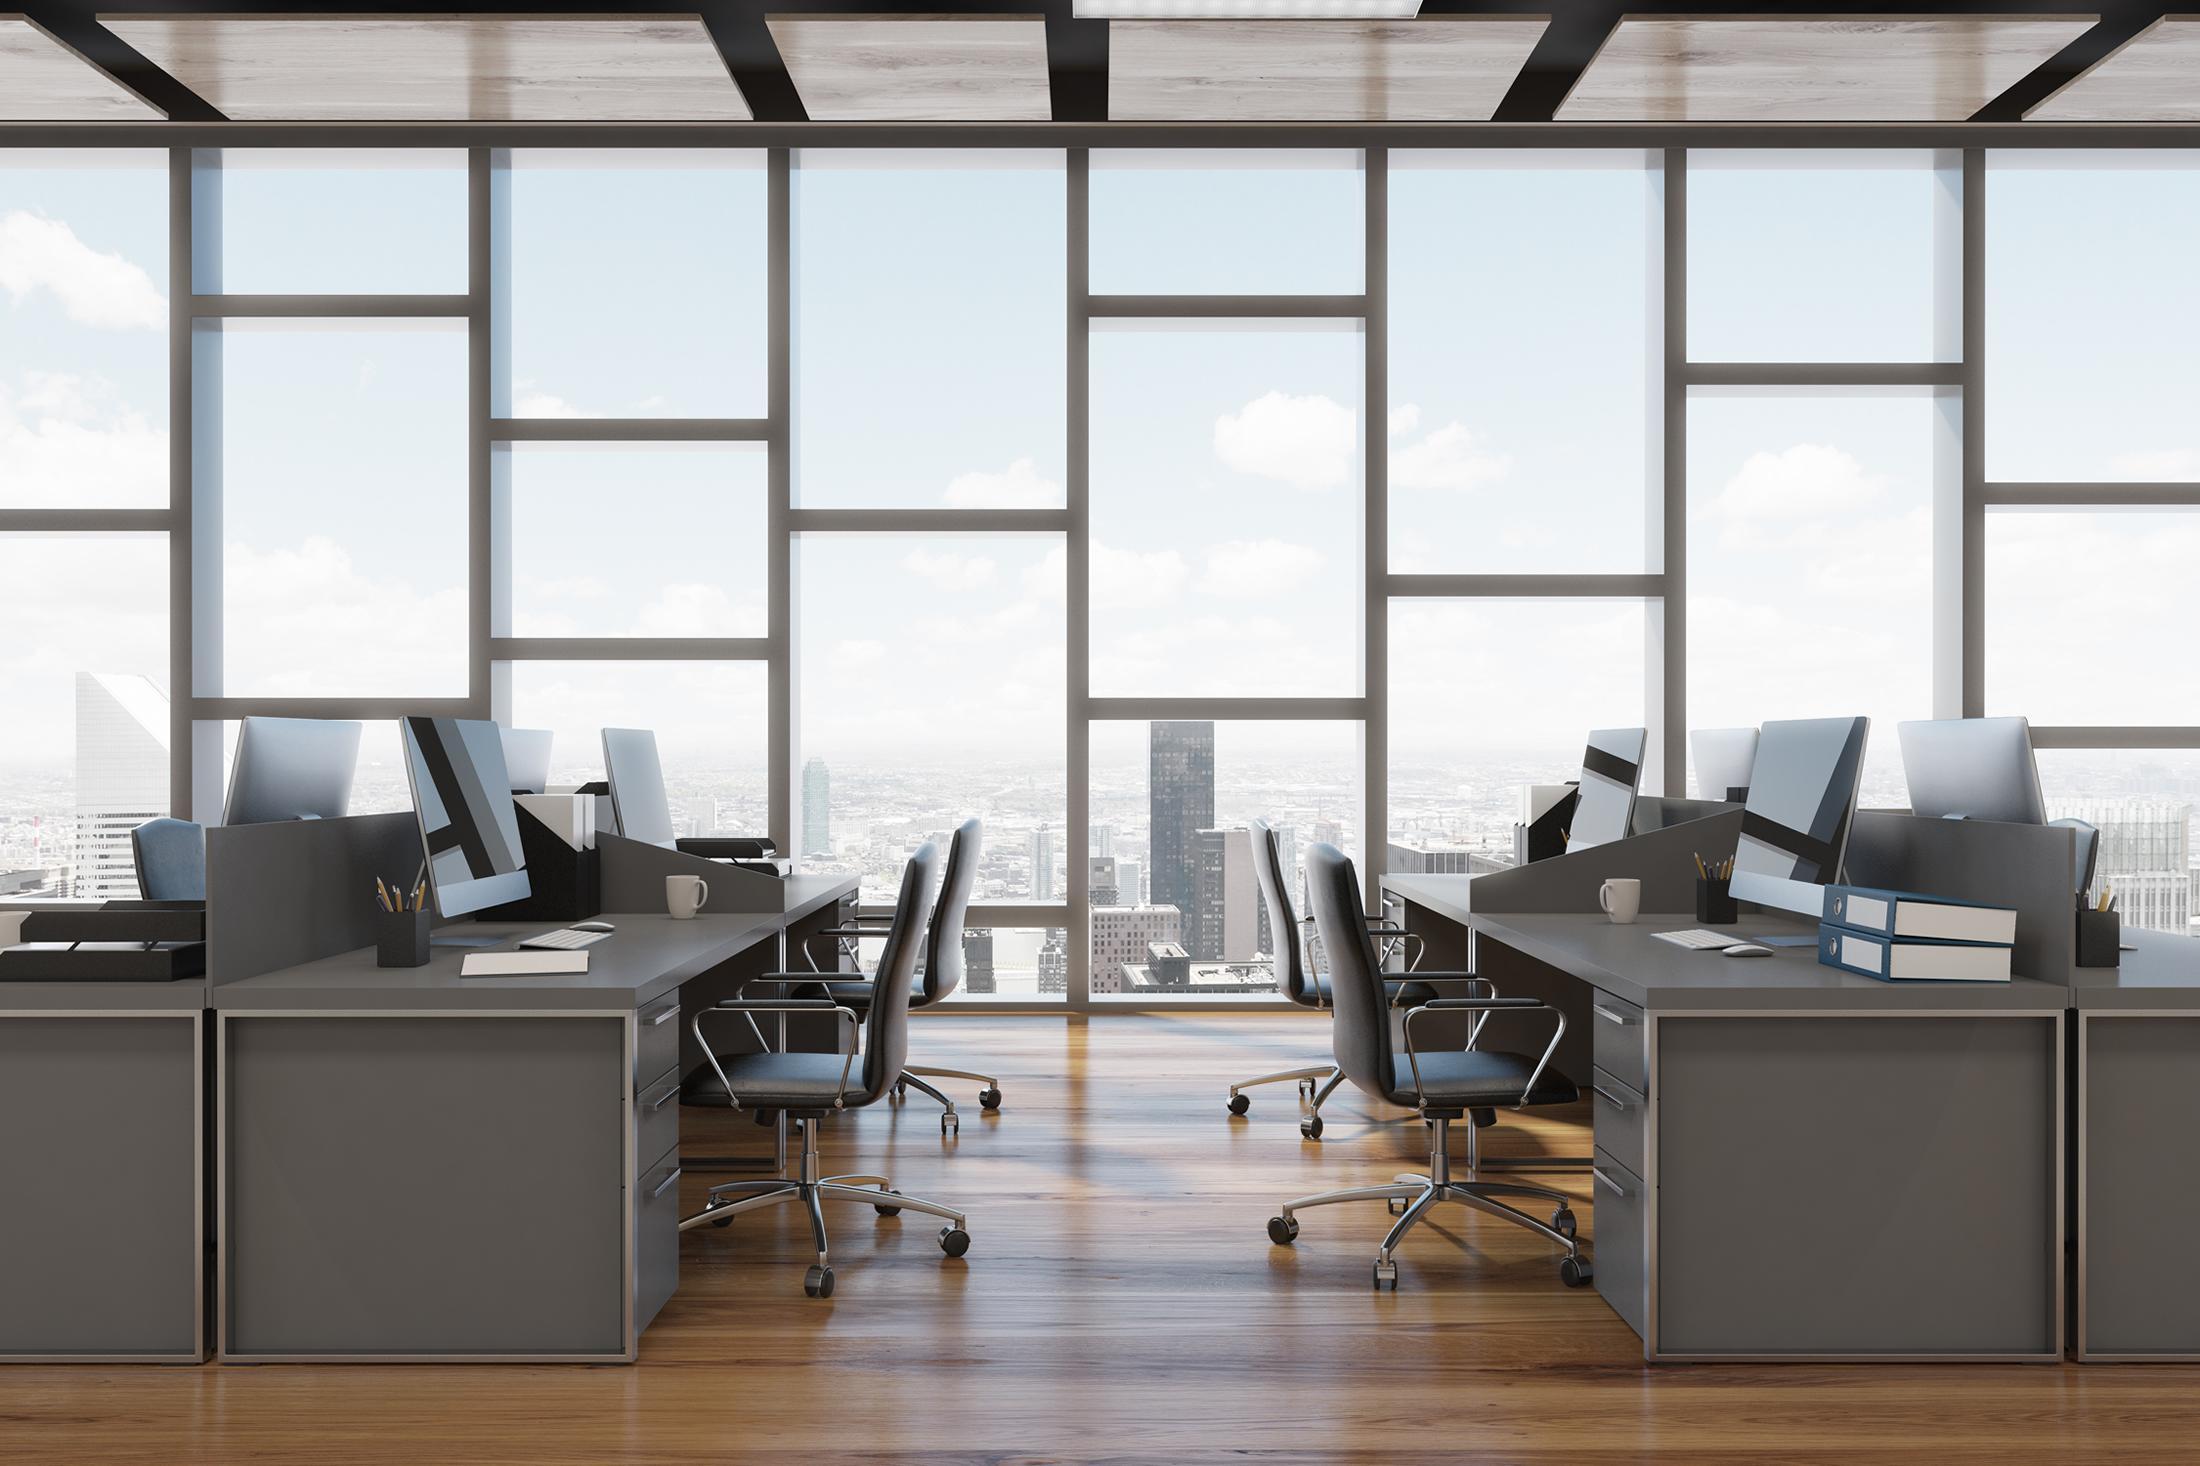 Shot of a communal office in a highrise with a glass window and a view of the city